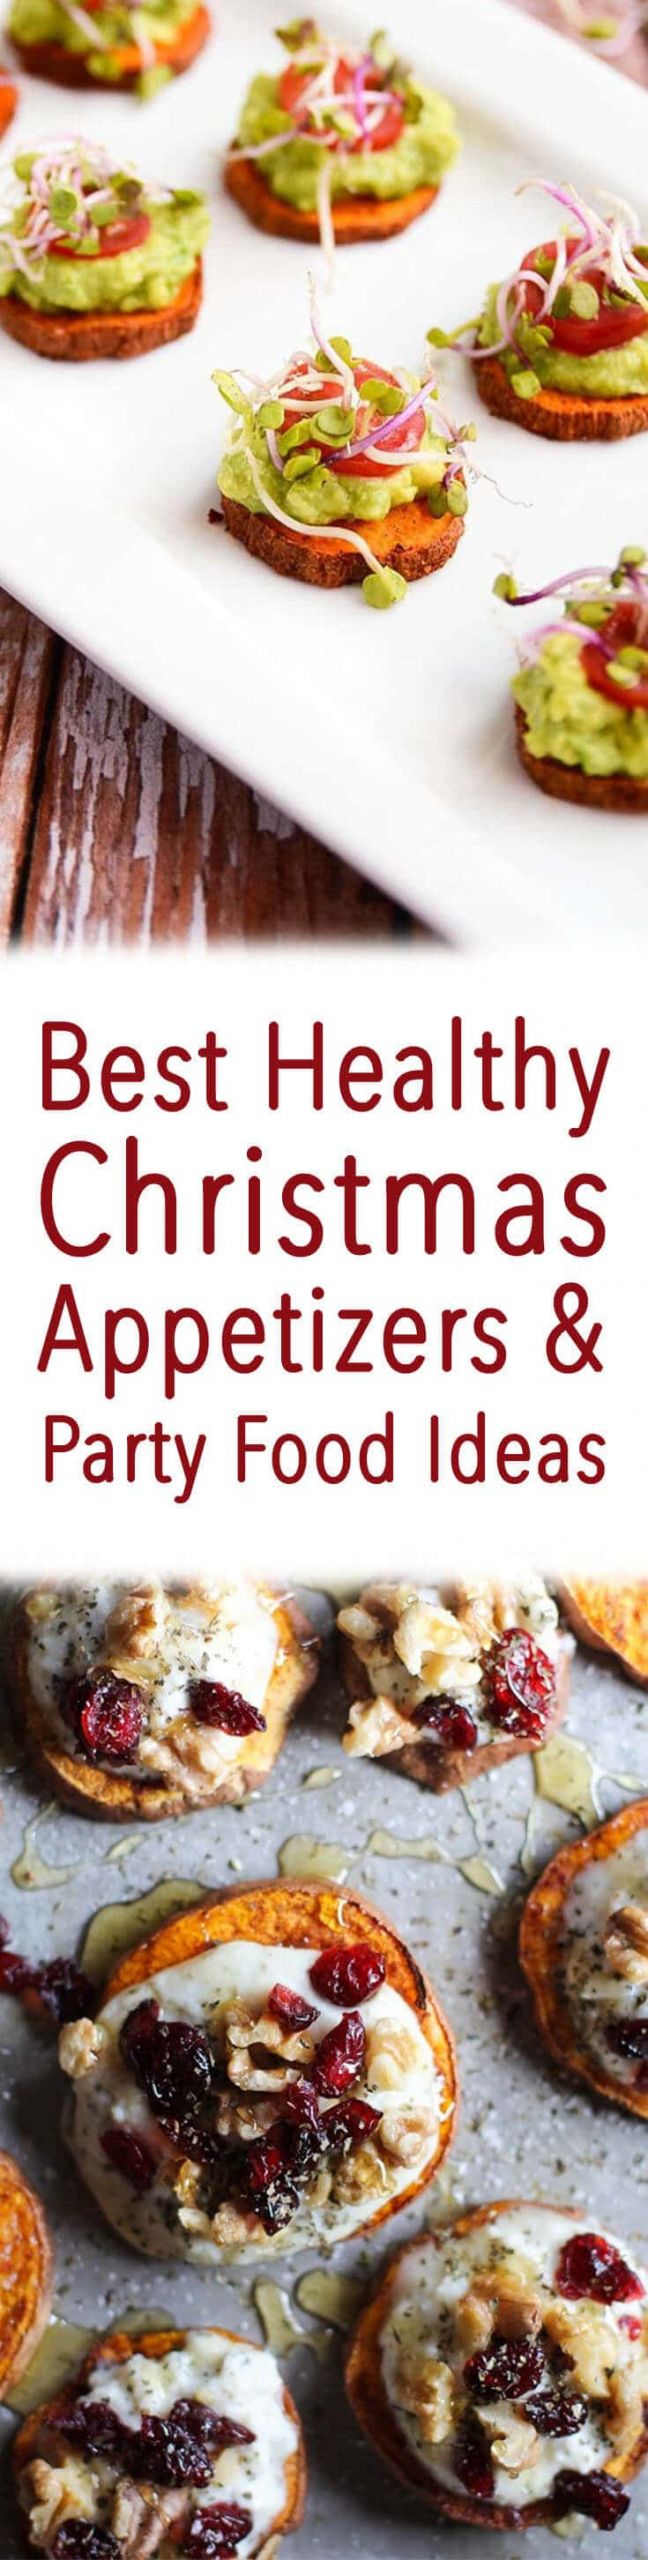 Healthy Holiday Appetizers
 16 Best Healthy Christmas Appetizers & Party Food Ideas